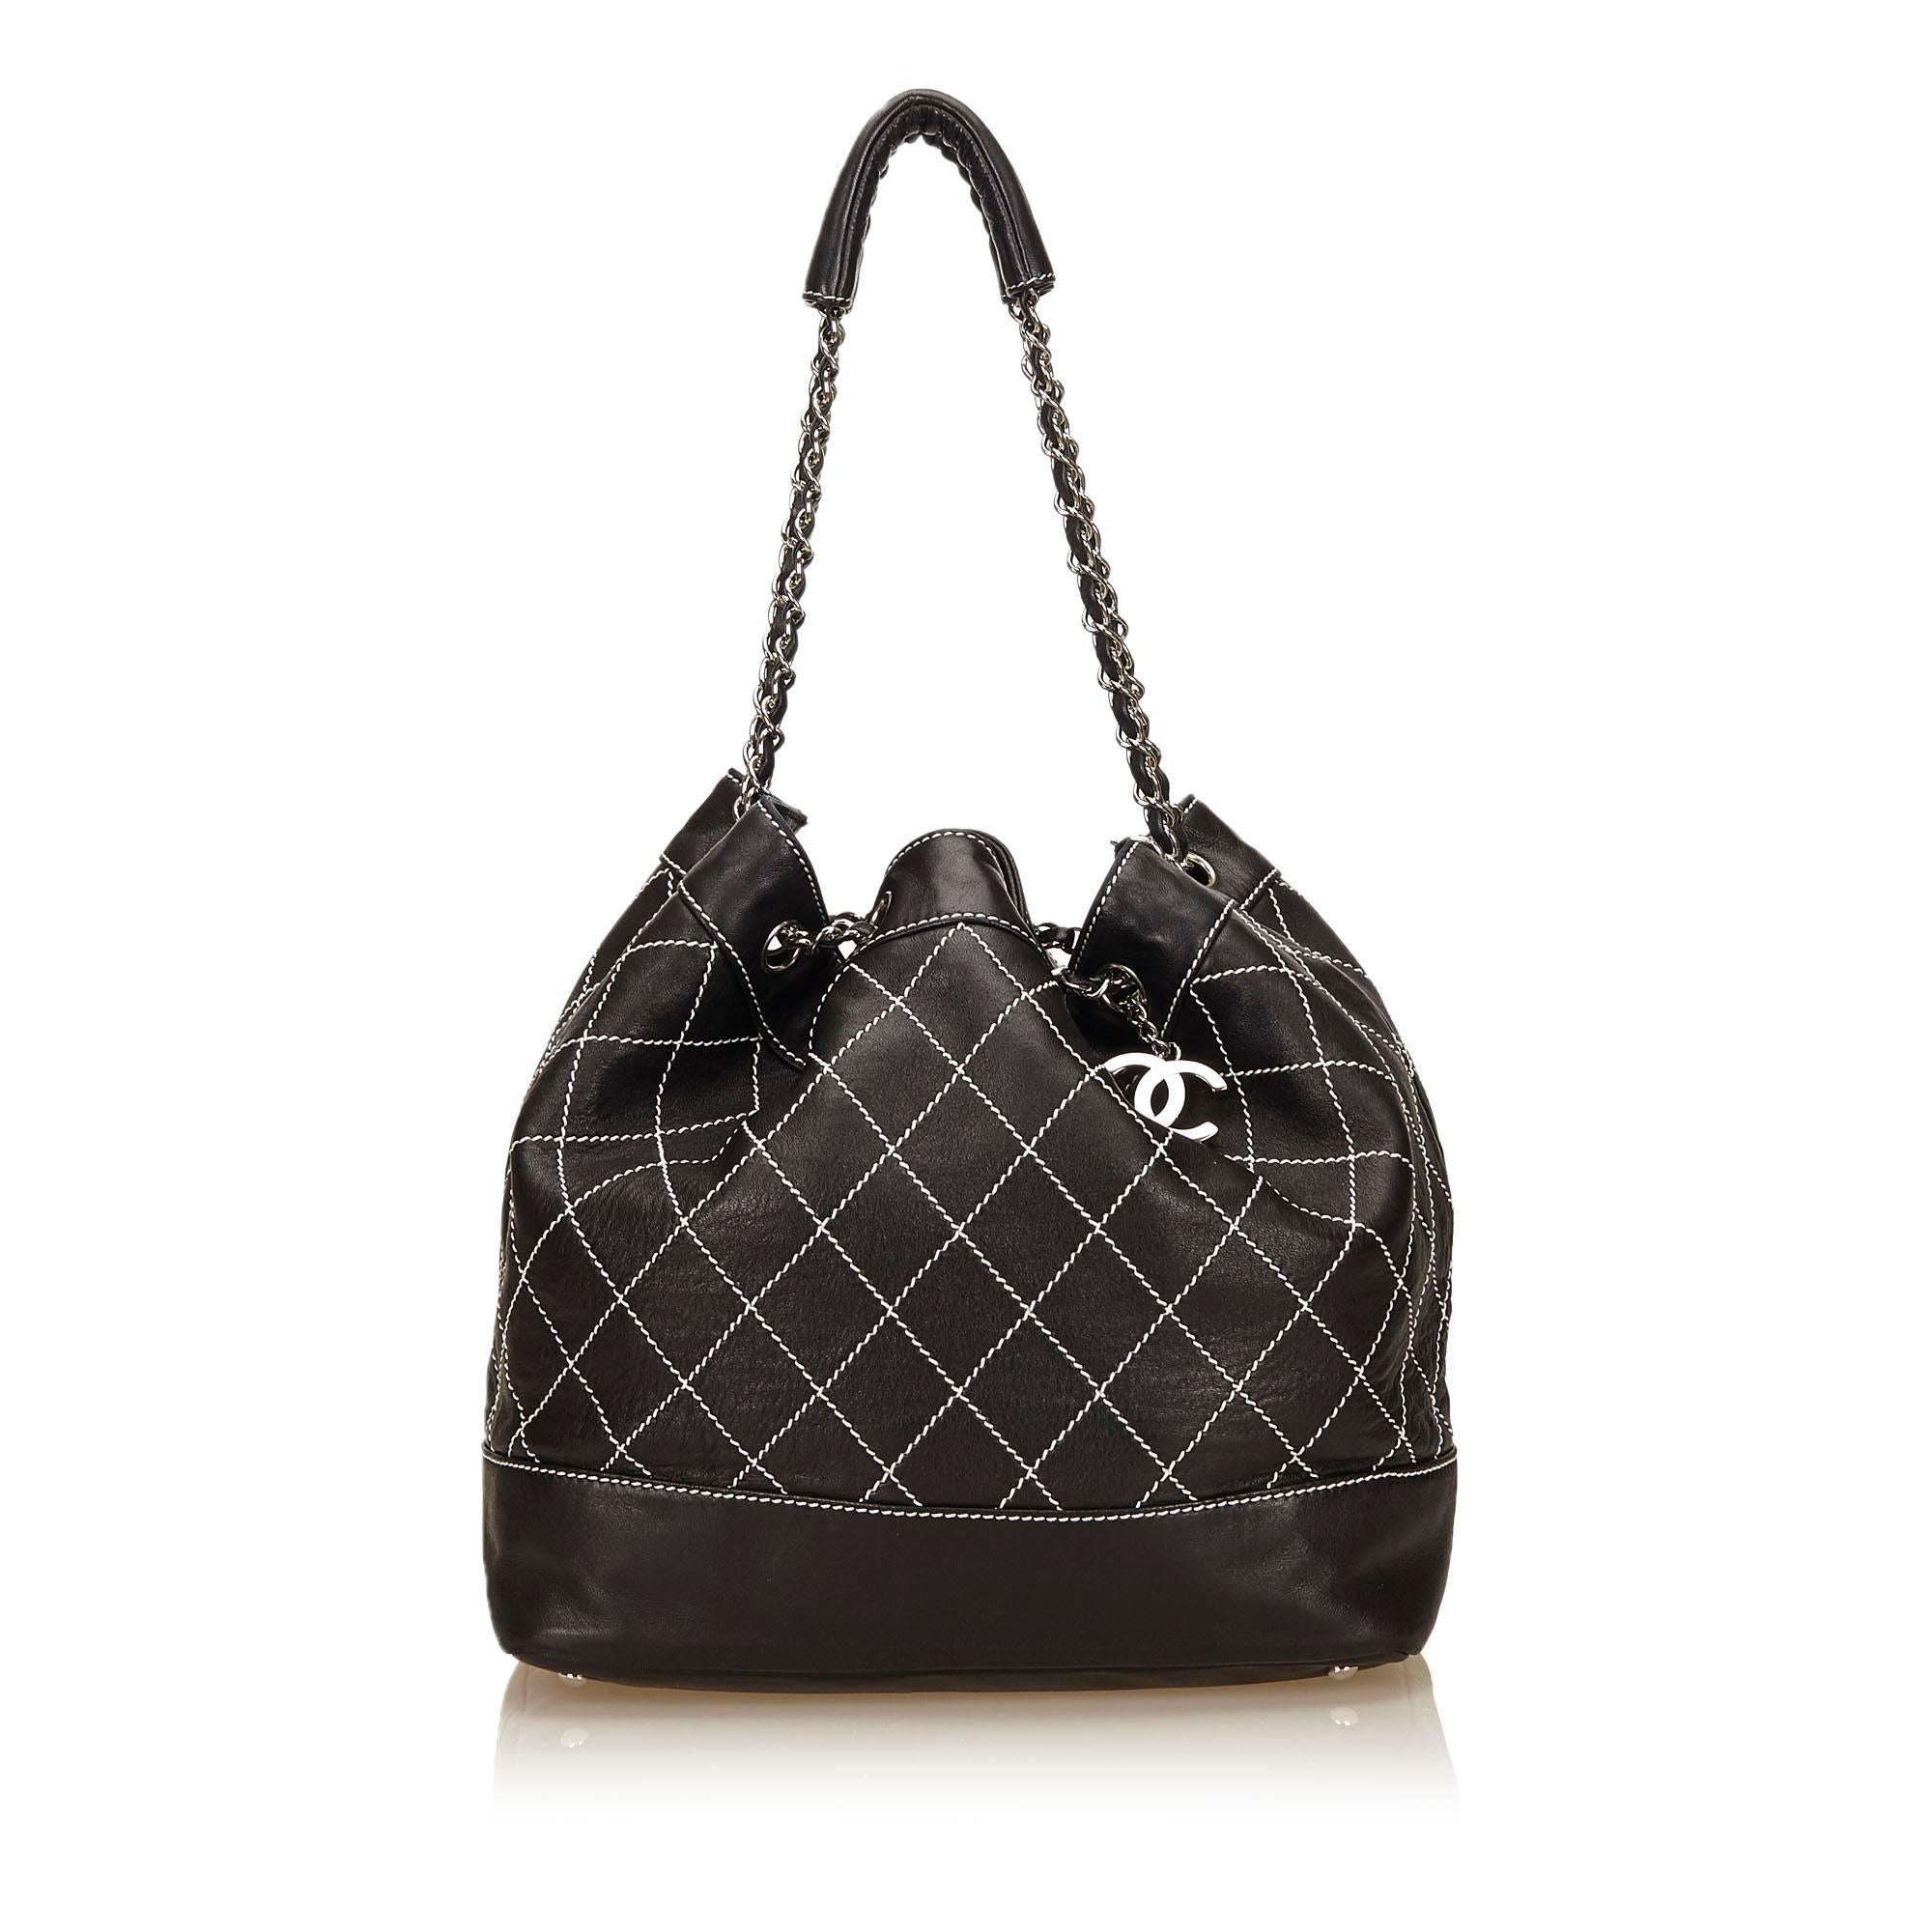 - This Chanel black and white wild stitch drawstring shoulder tote bag featuers a leather body, a silver-tone hardware, and an interior zip pocket. The bag has silver eyelets through which silver chain link straps are threaded and has leather